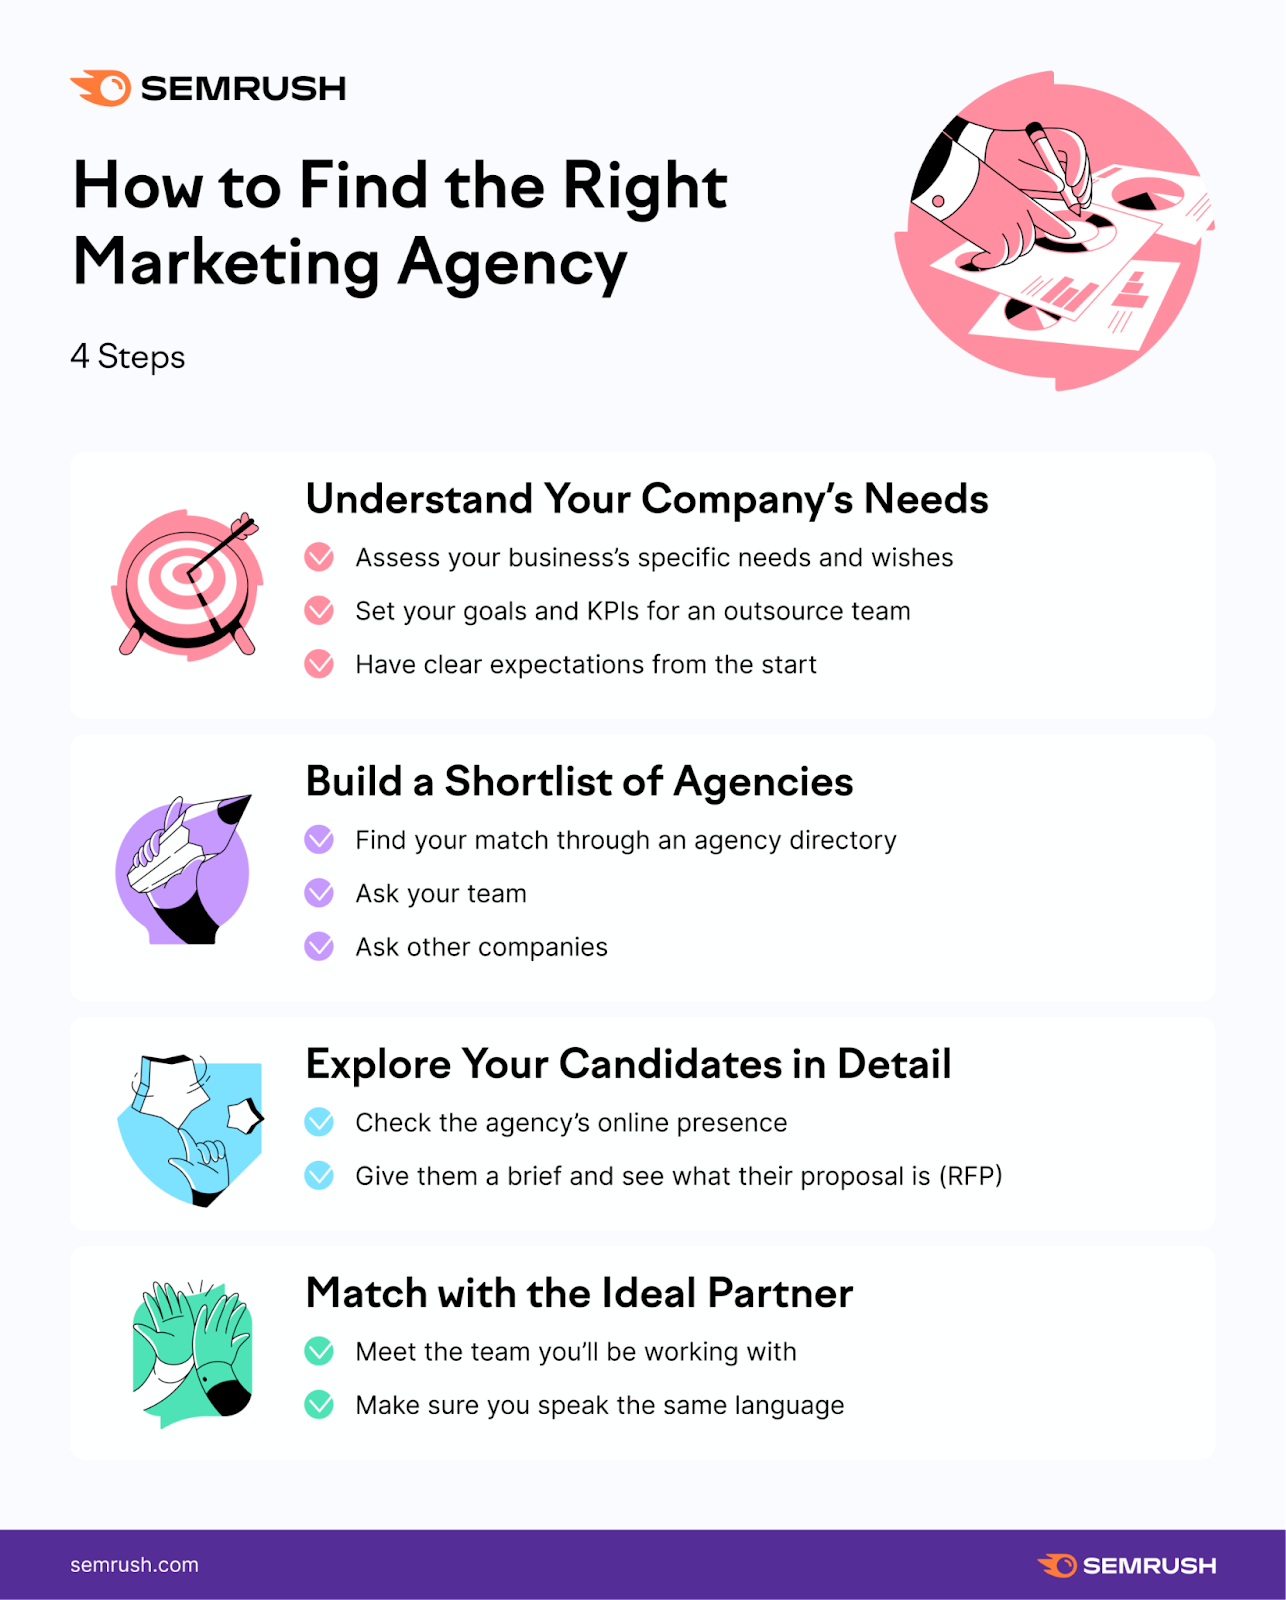 An infographic on how to find the right marketing agency